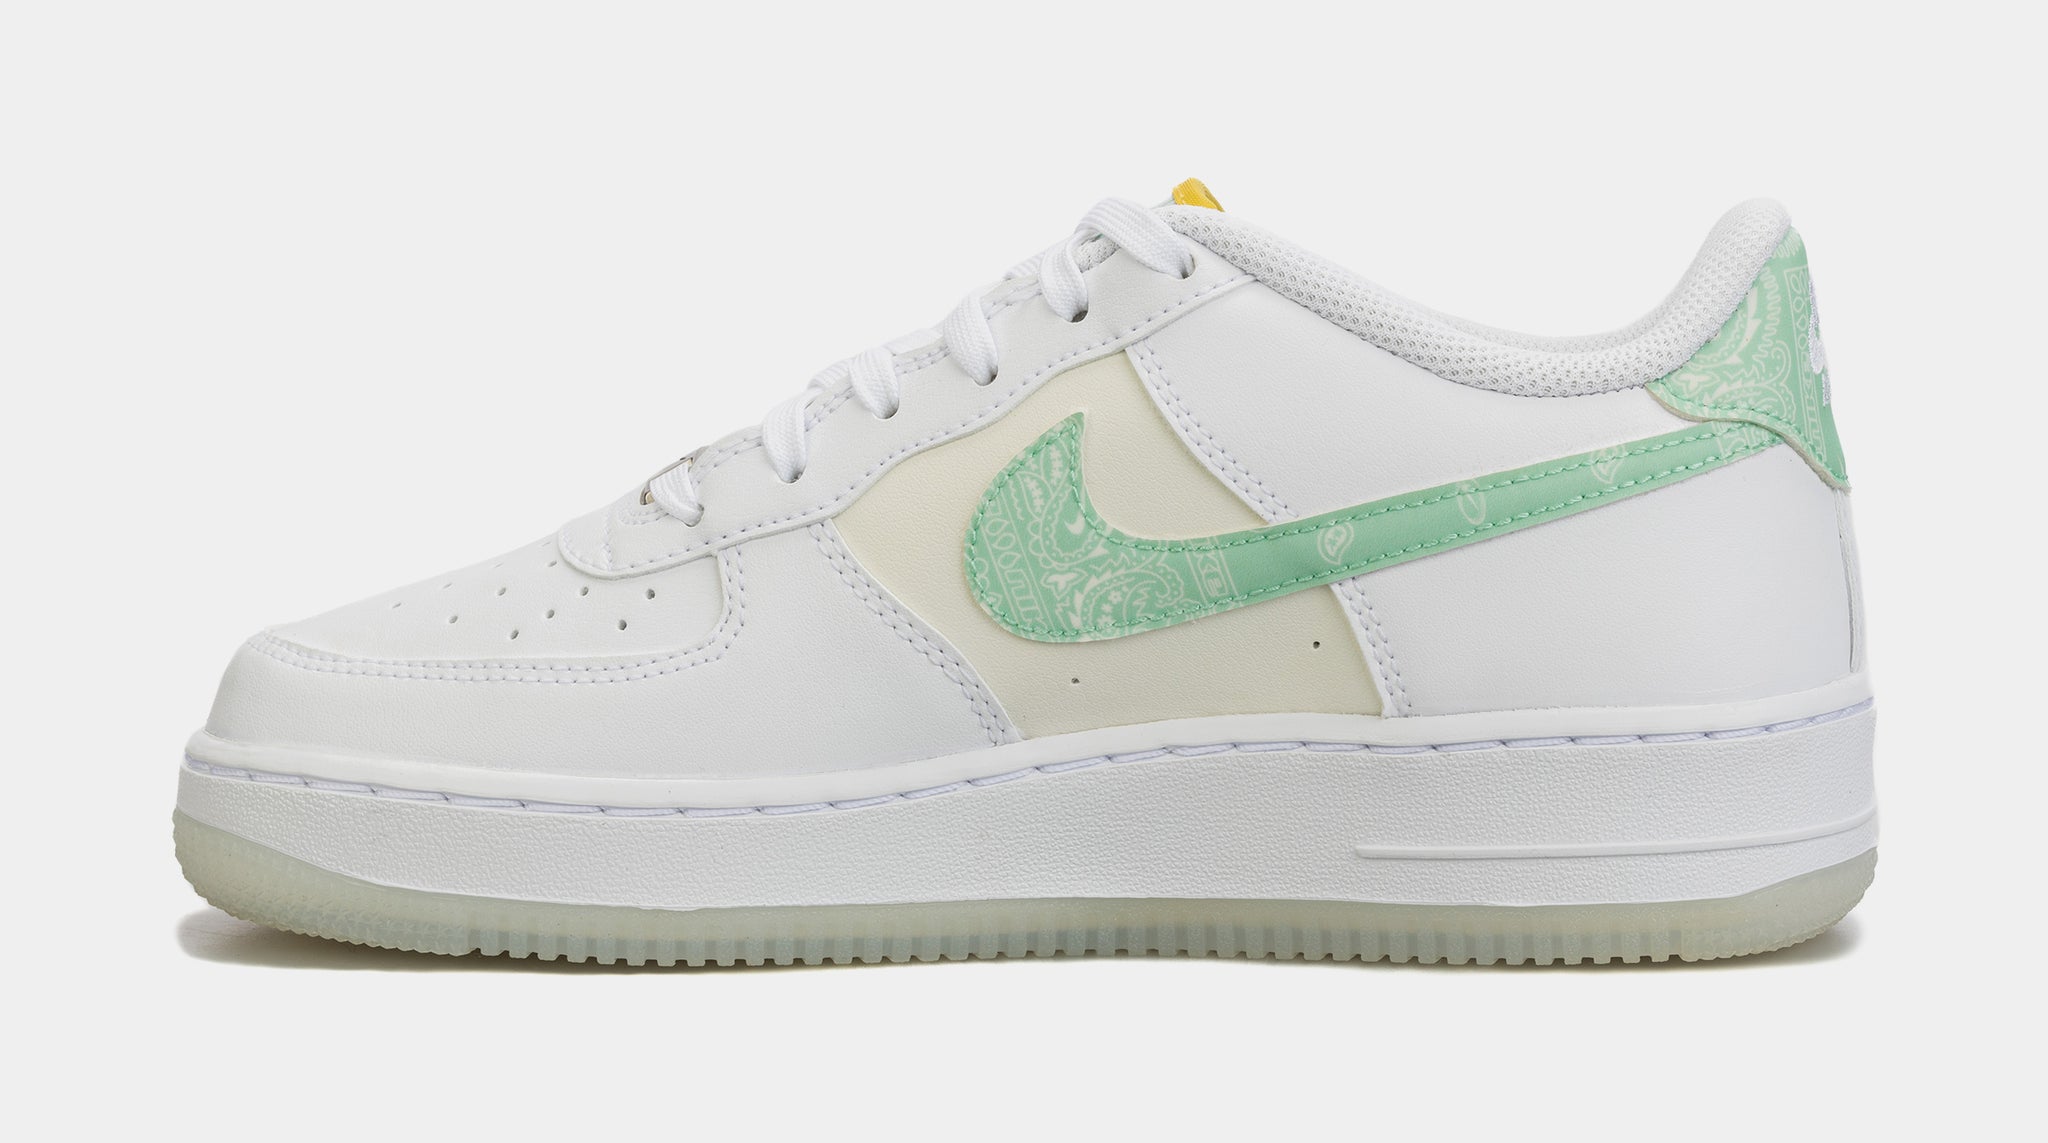 Nike Air Force 1 Mid LV8 Grade School Shoes